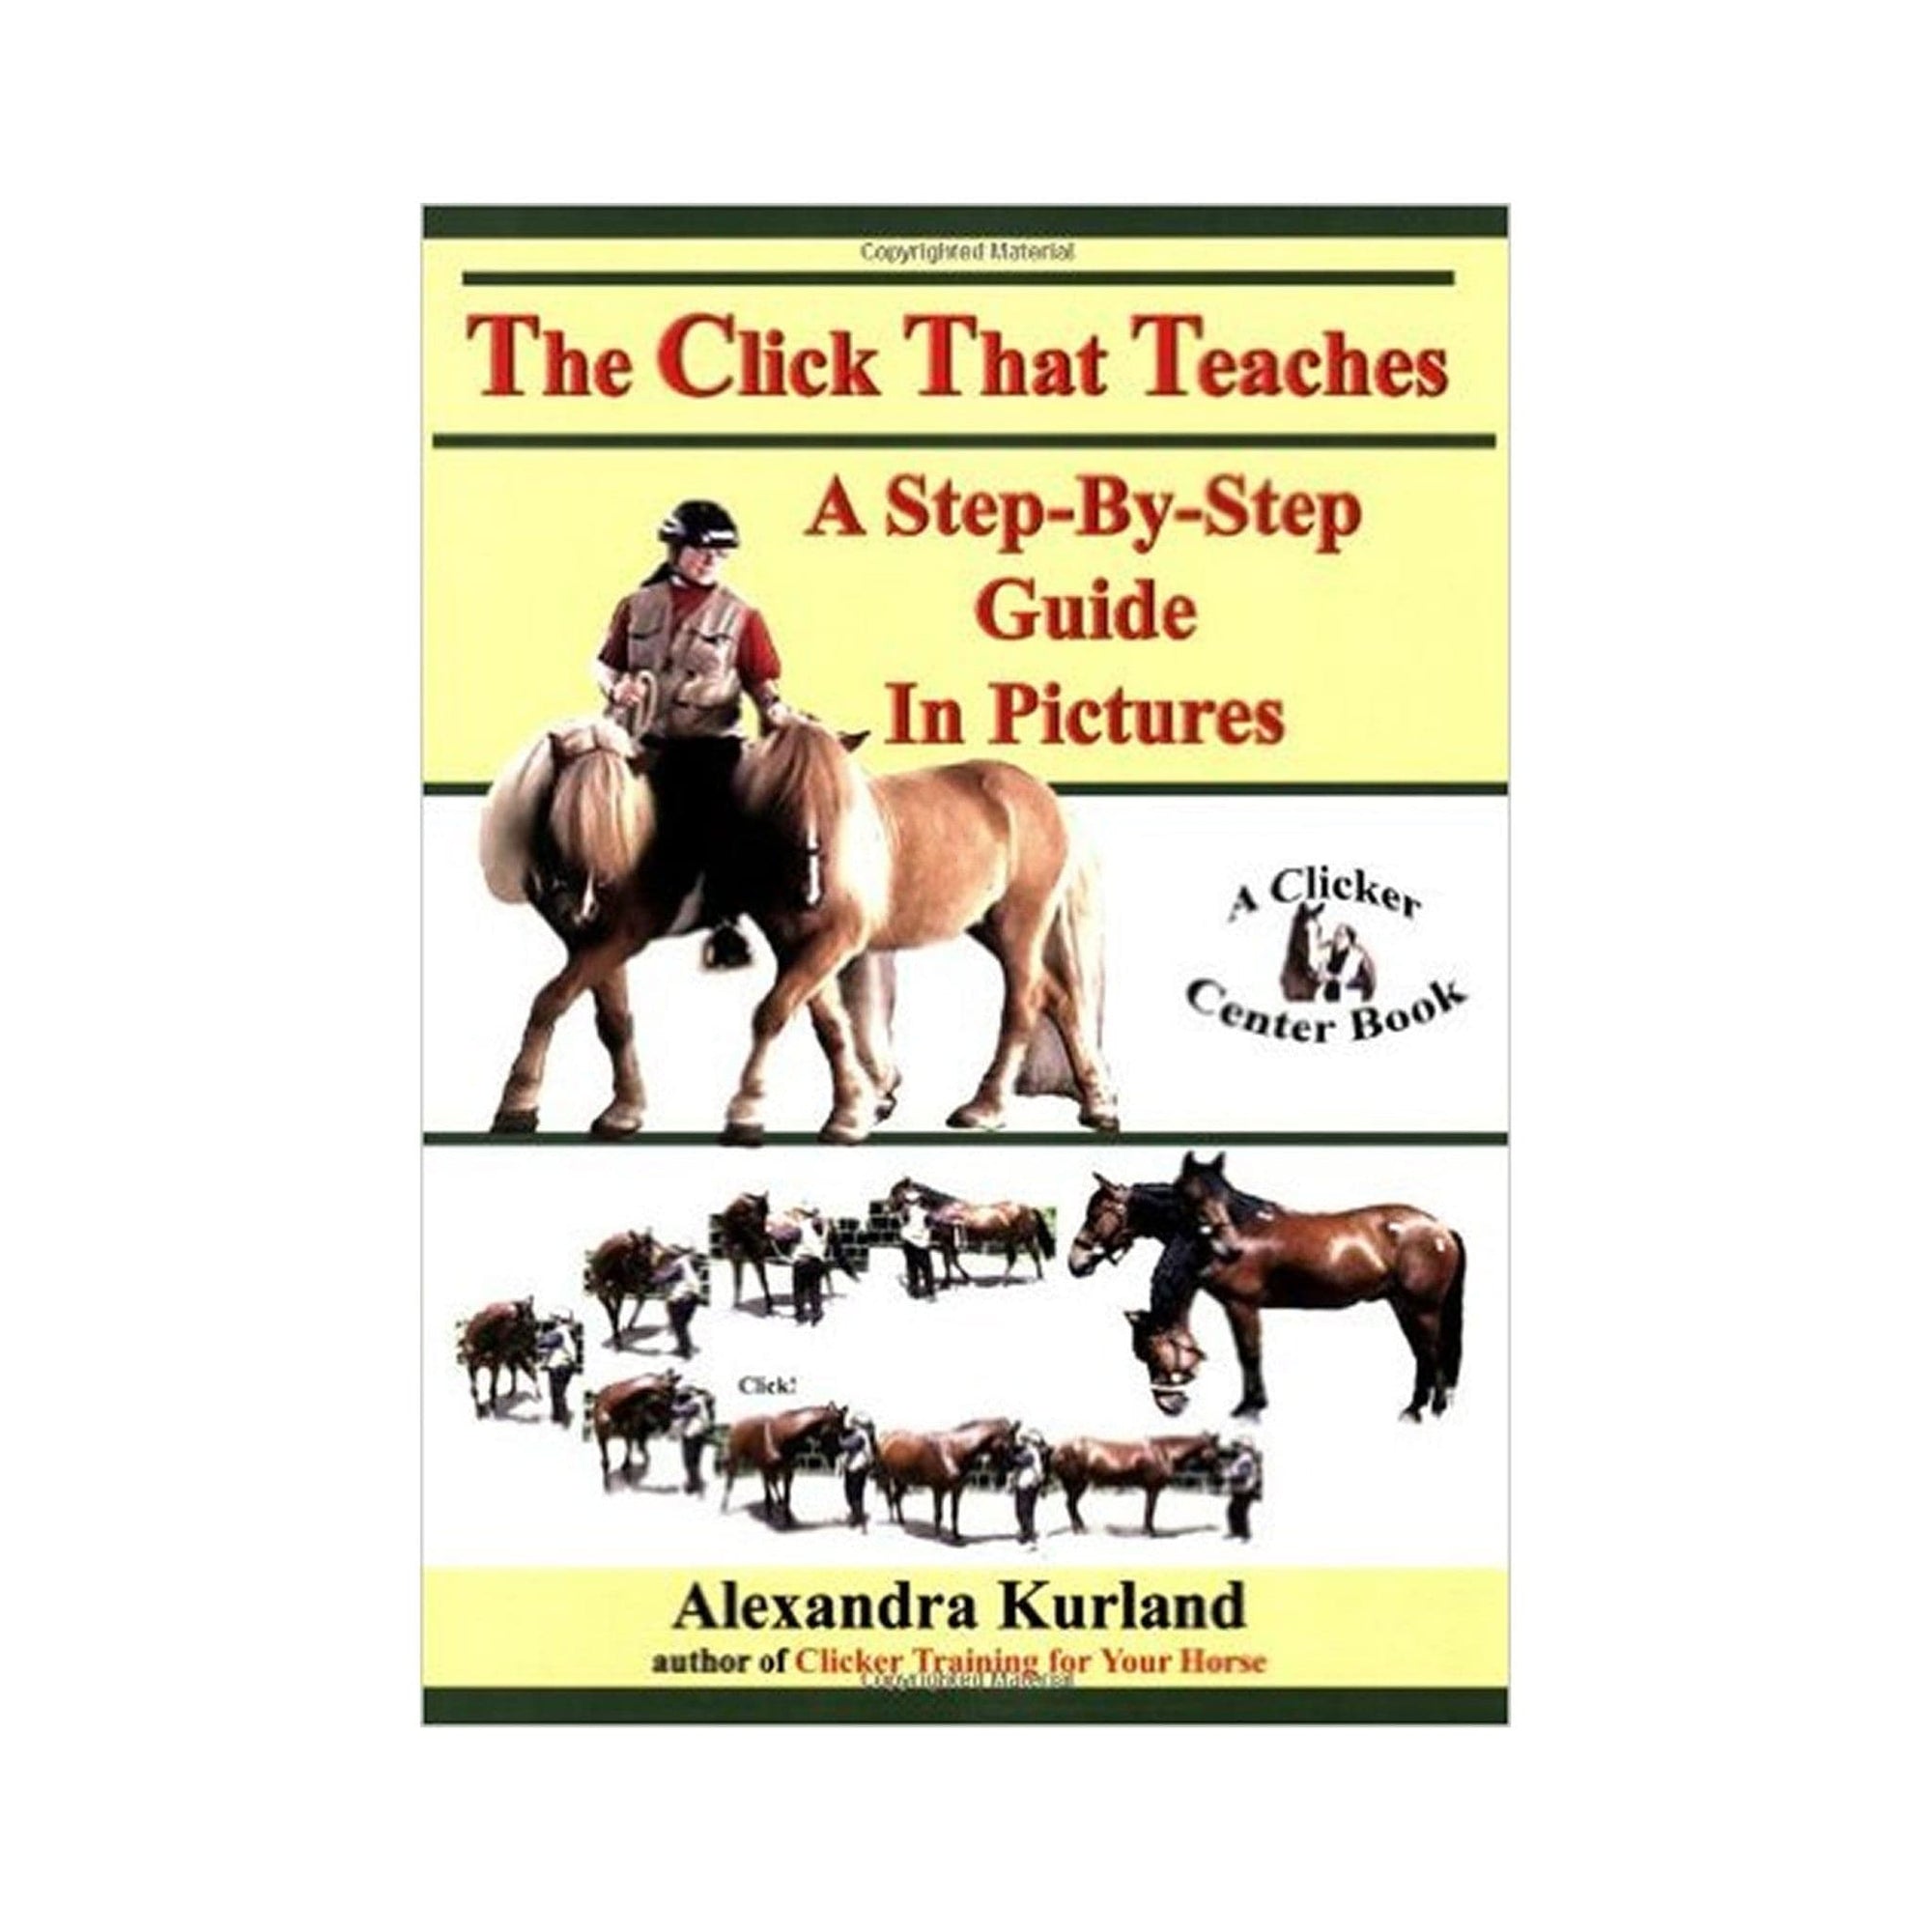 The Click That Teaches: A Step-by-Step Guide in Pictures by Alexandra Kurland